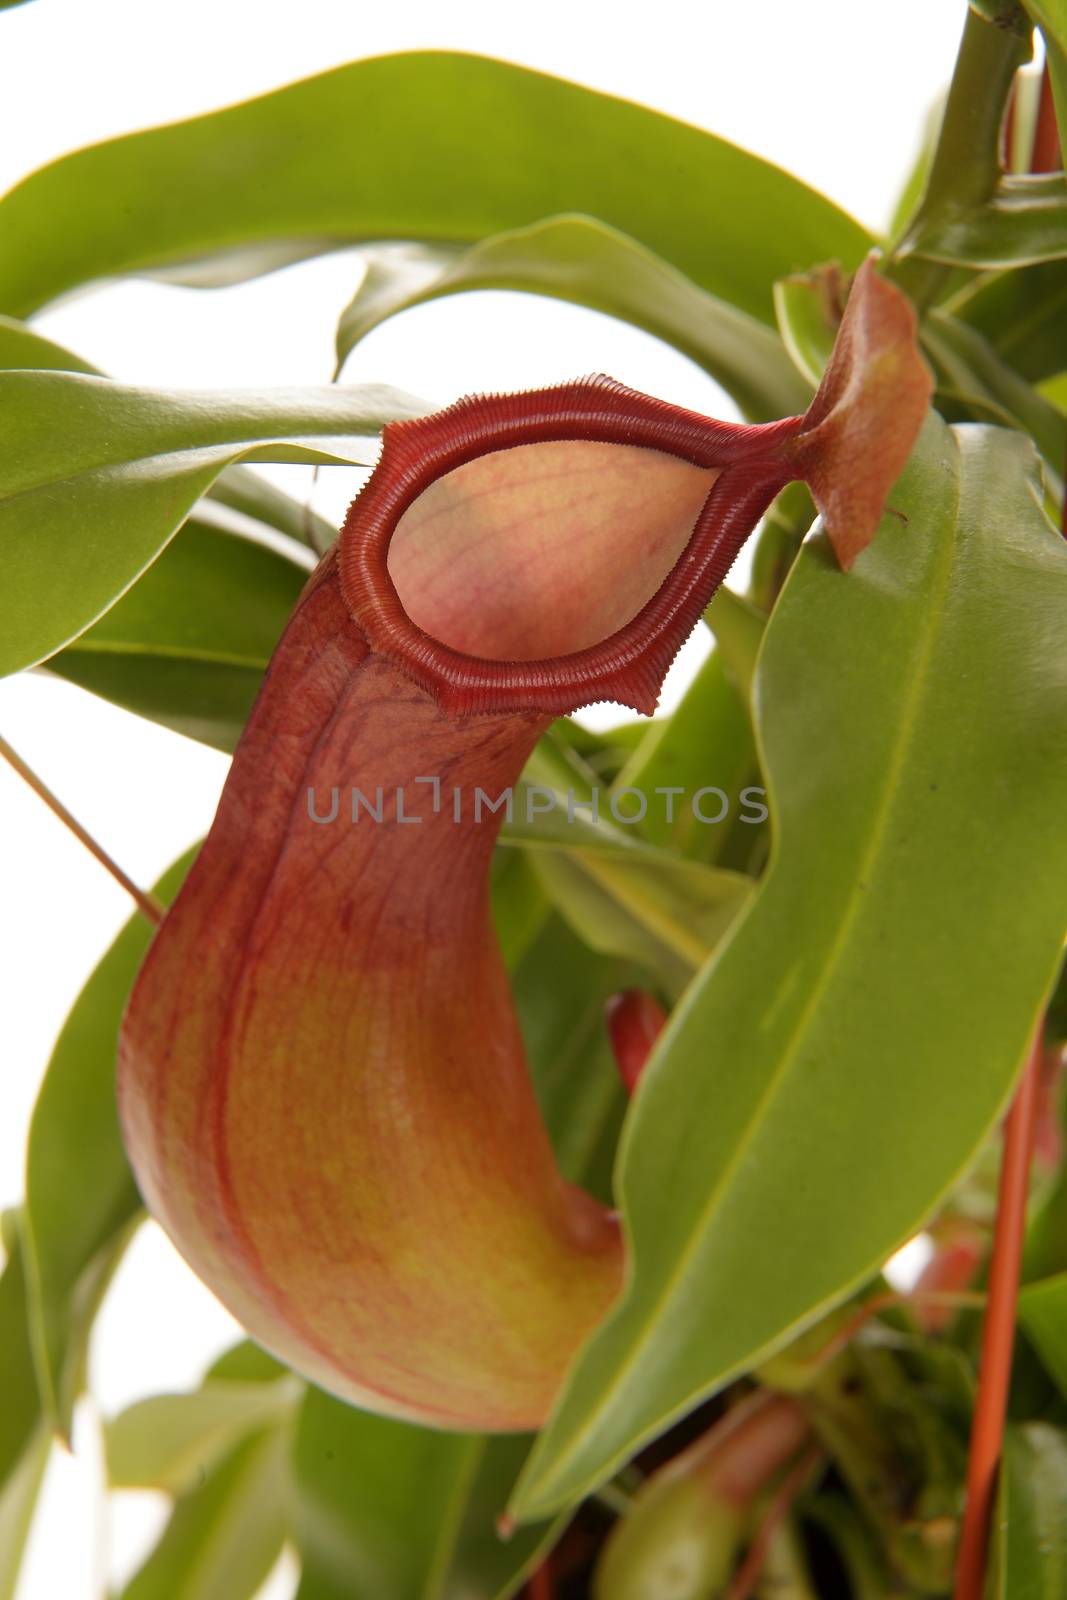 Nepenthe tropical carnivore plant on an isolated white background